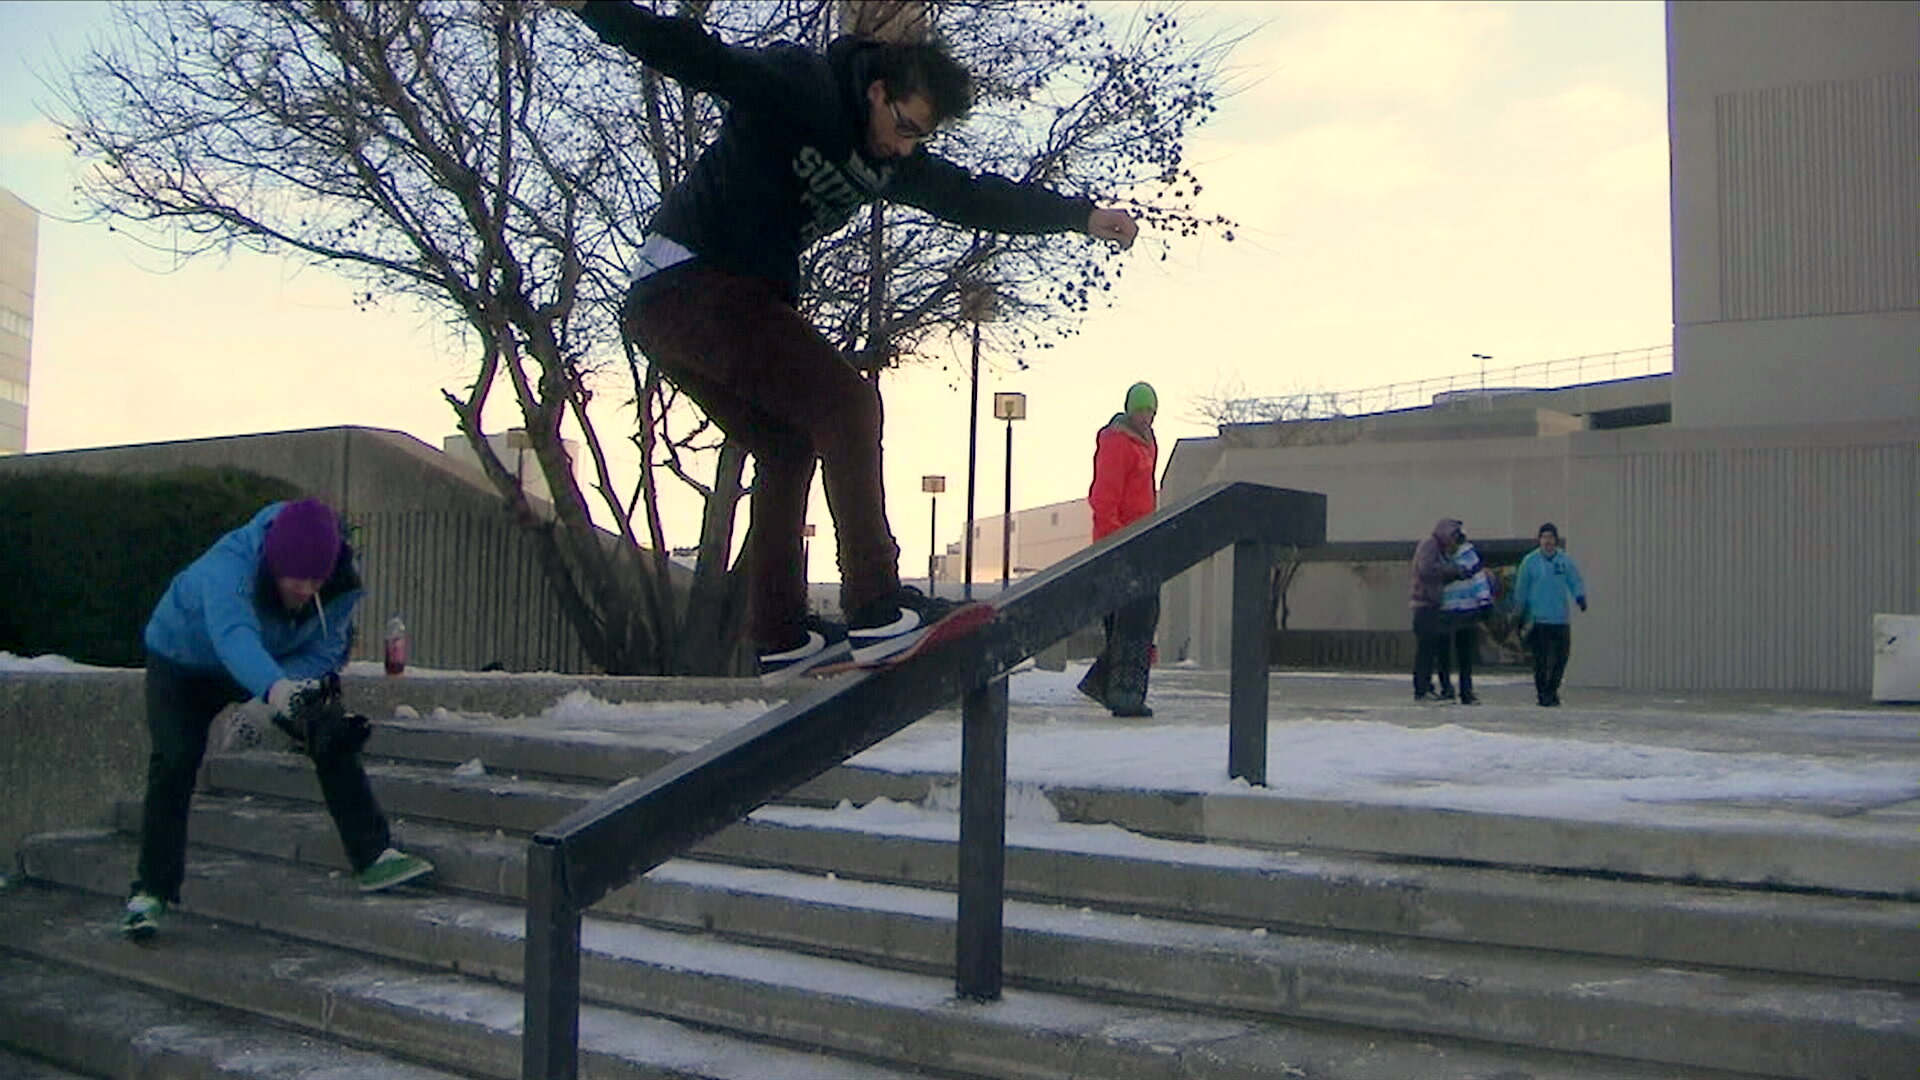 David Engerer in the middle of the most tech handrail trick done yet...